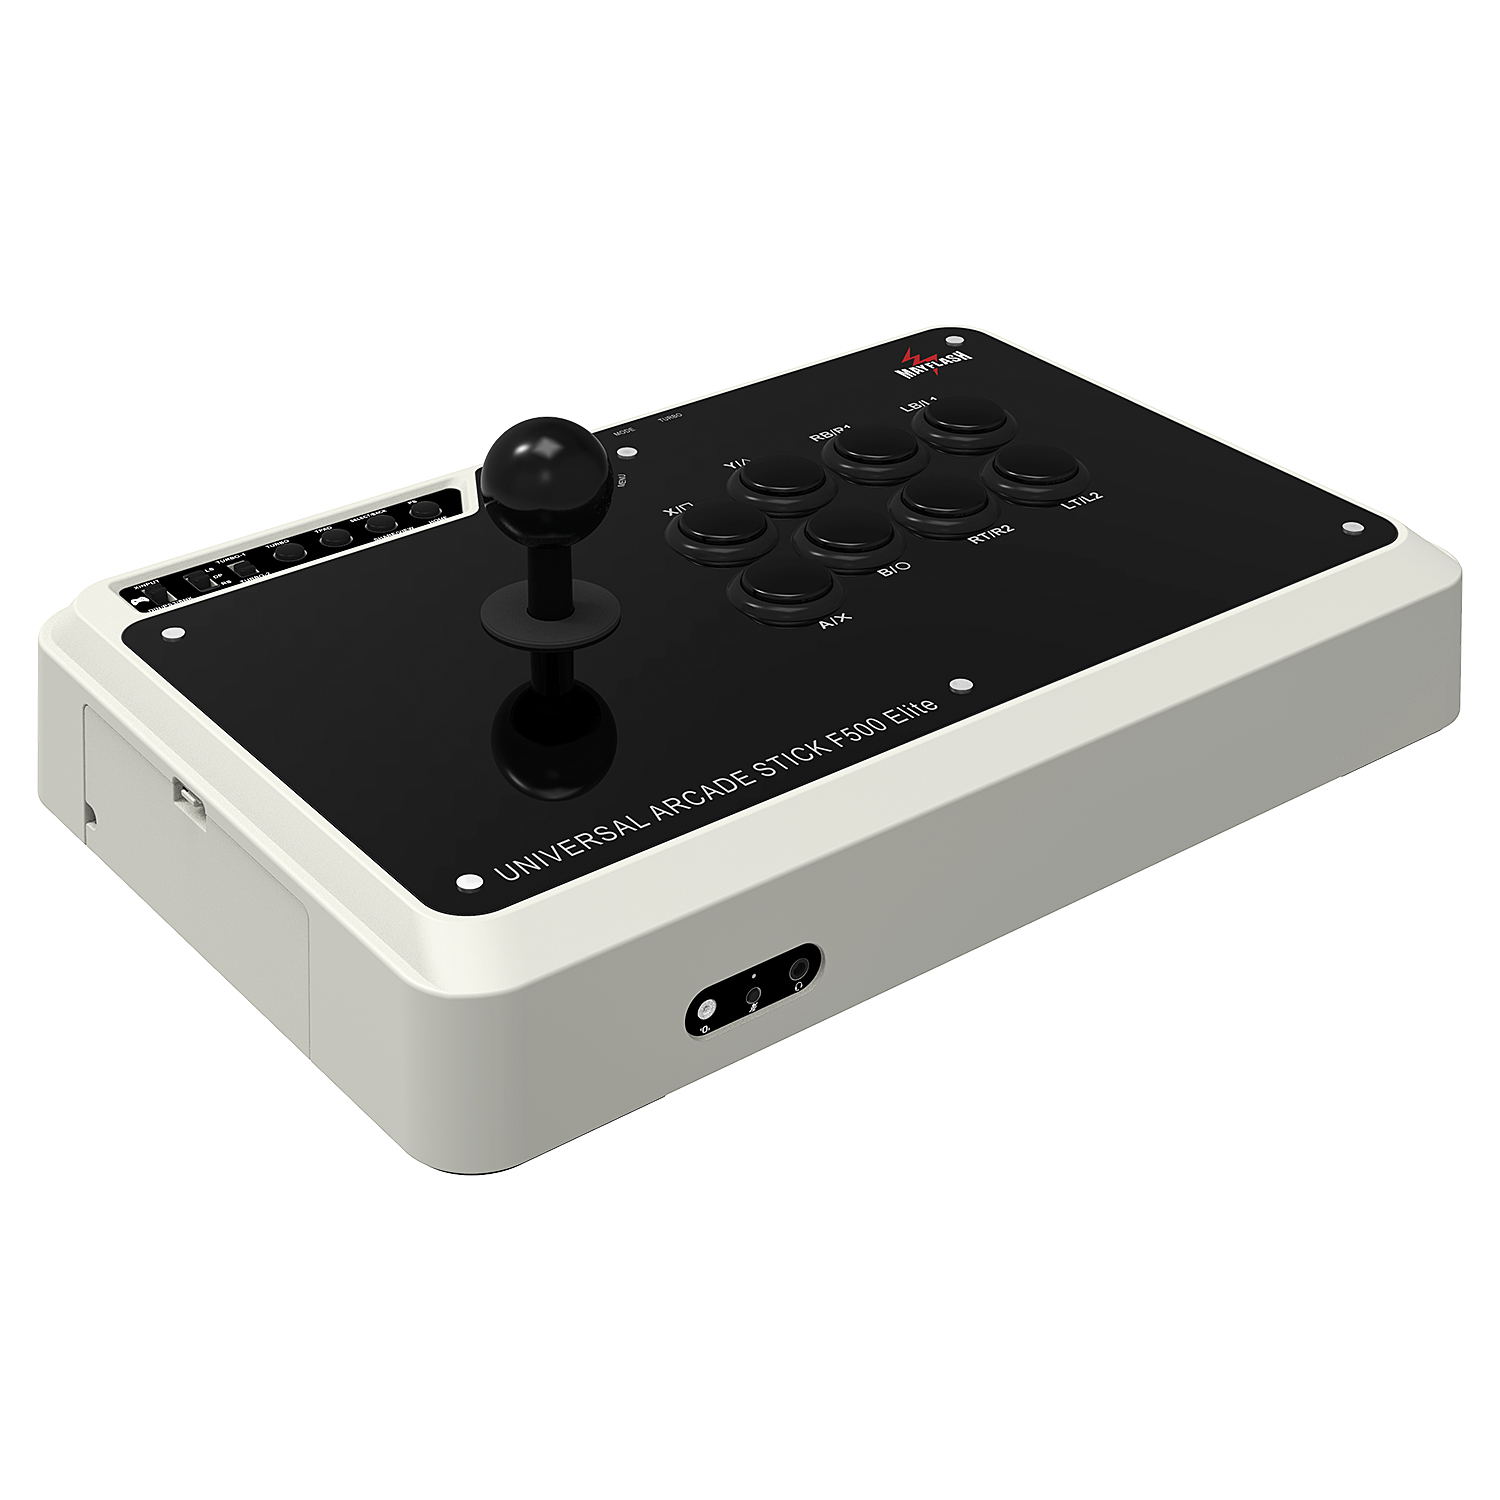 Universal Arcade Fighting Stick F500 Elite for PC, PS3, X360, PS3